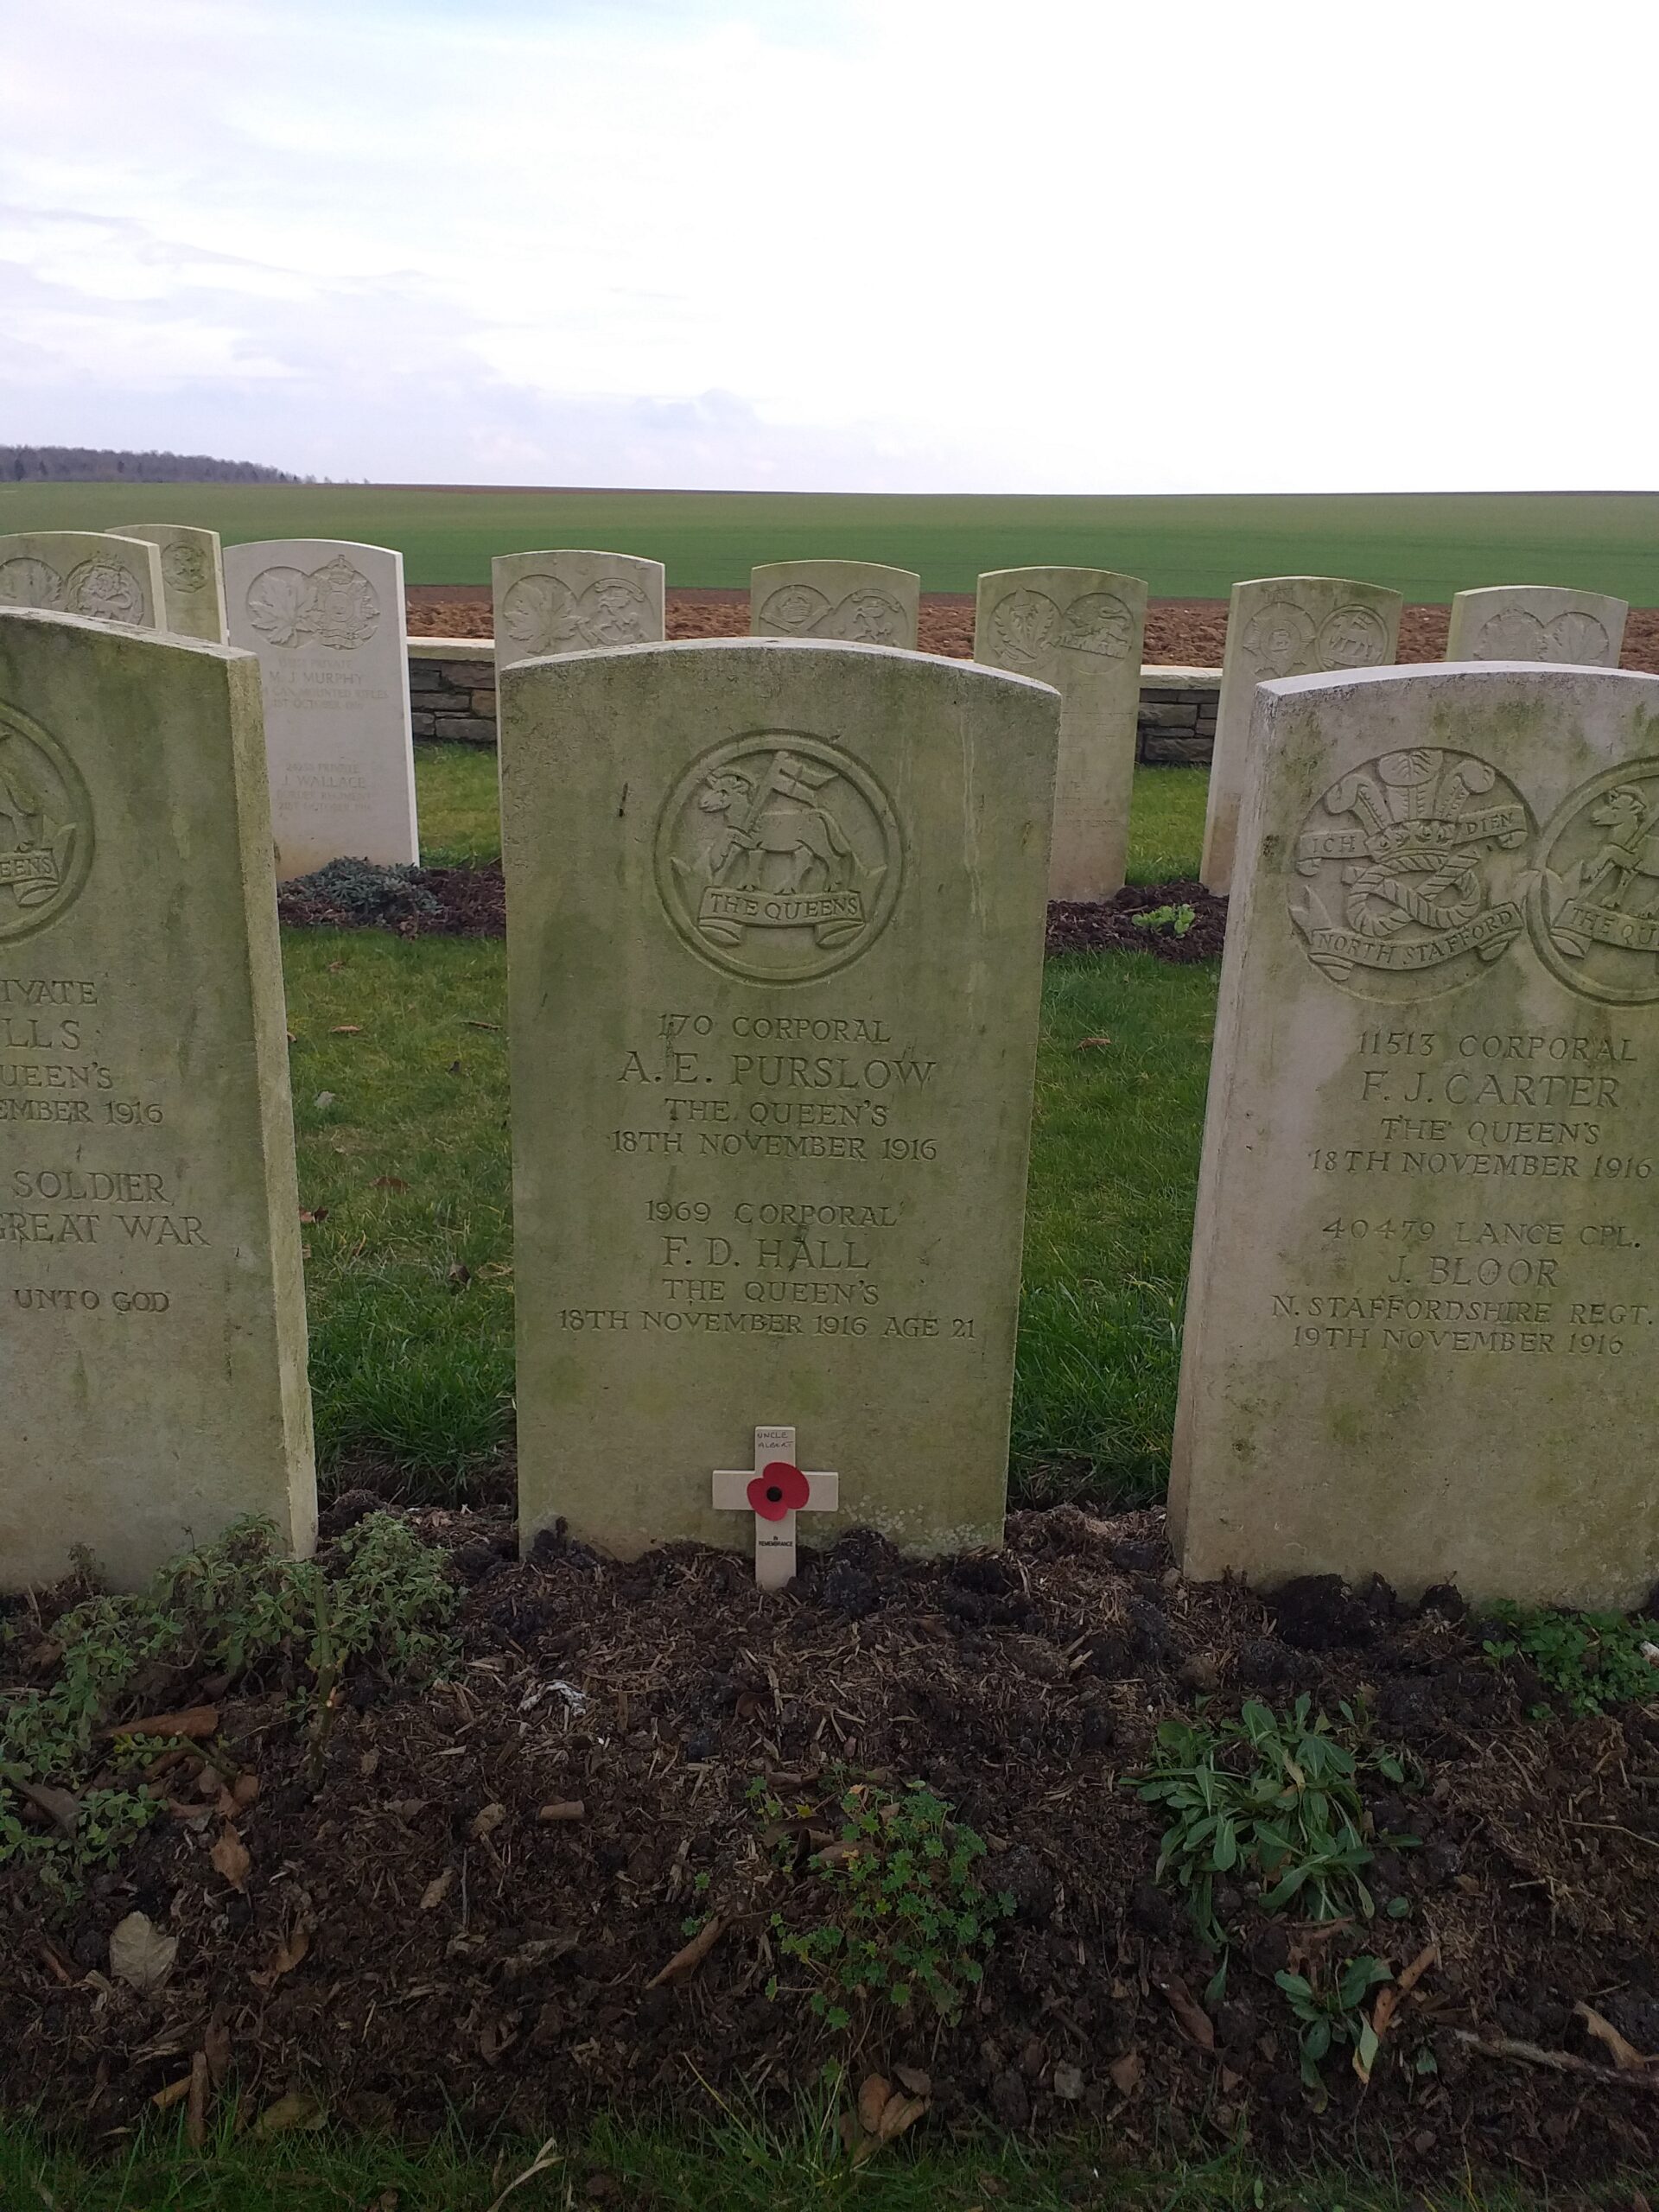 World War One graves at Stump Road, showing Commonwealth War Graves Commission headstone for A E Purslow, with a small commemorative cross in front